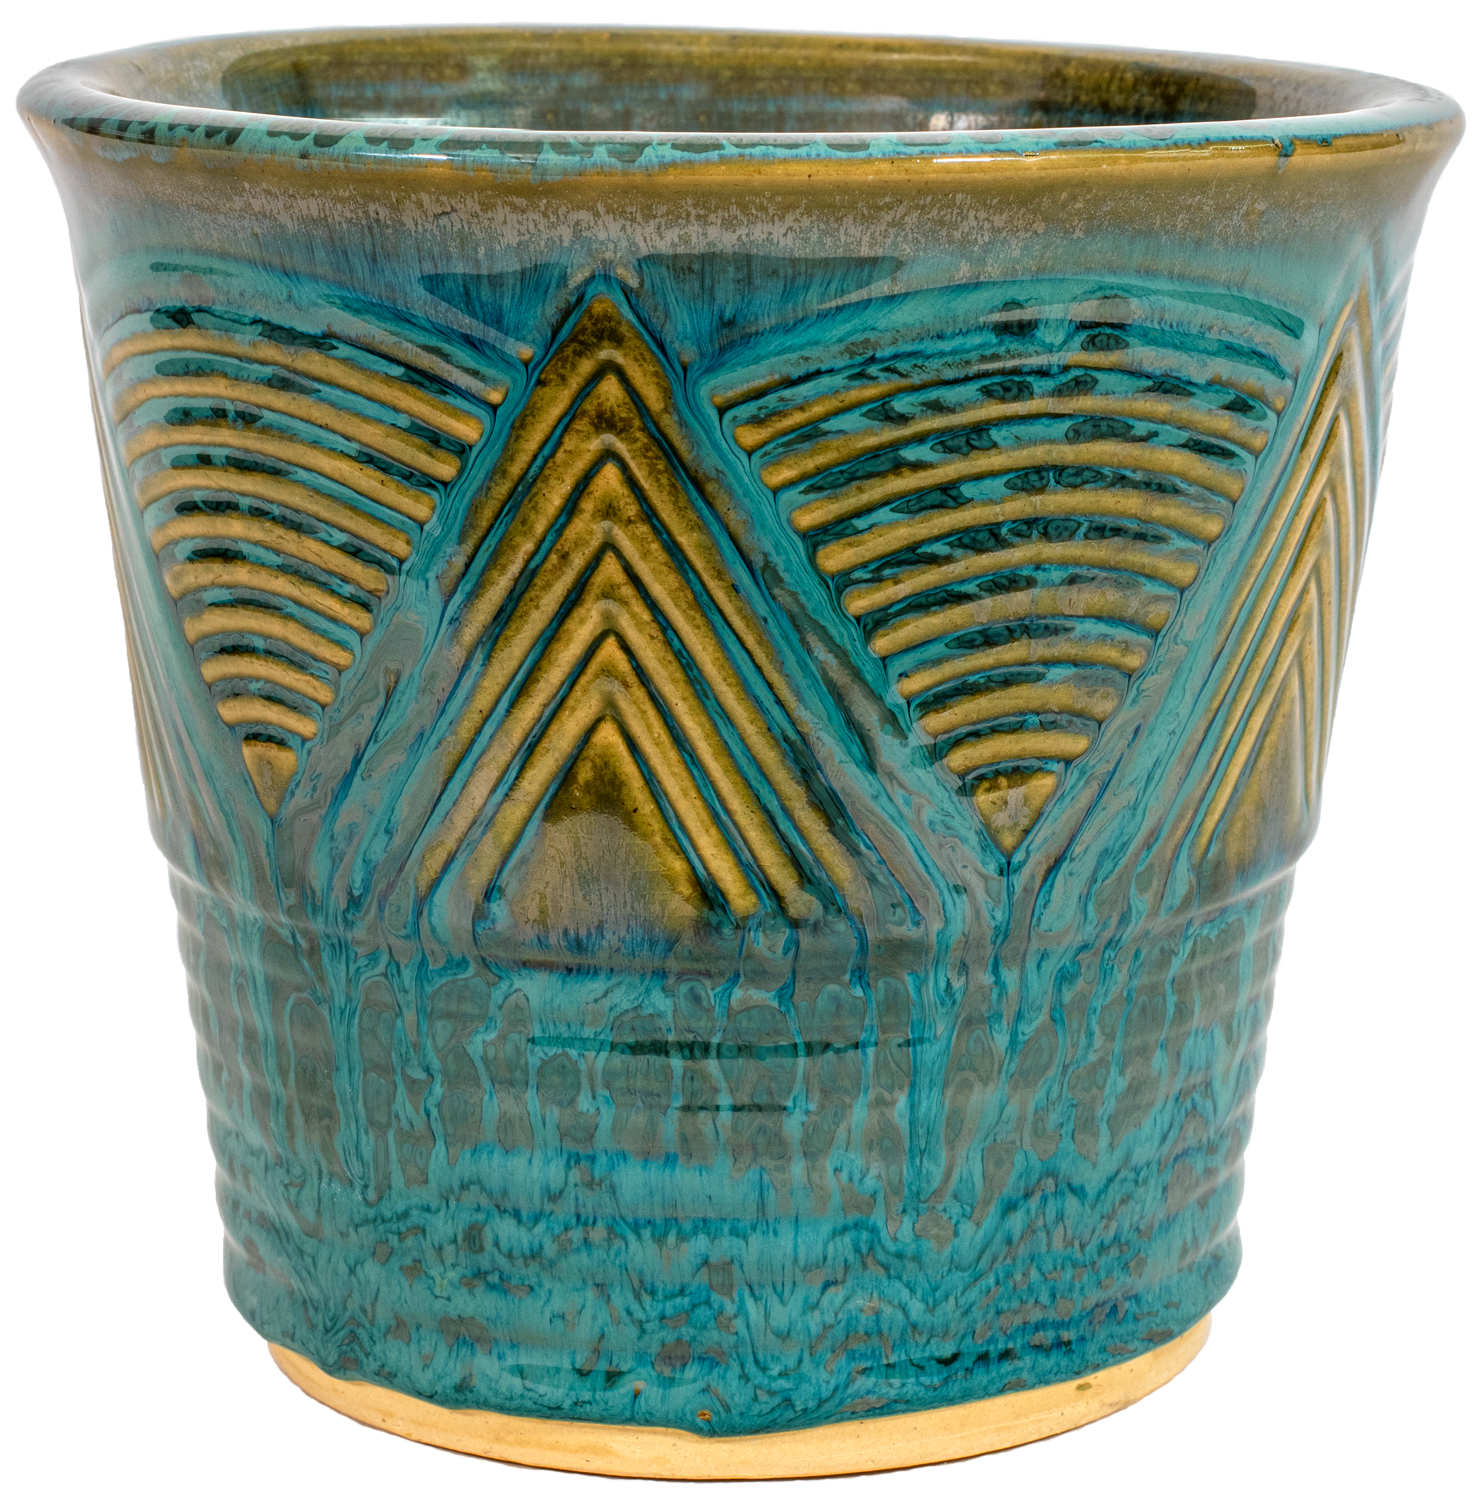 American Made indoor ceramic planter. Art deco style design in a Turquoise glaze color